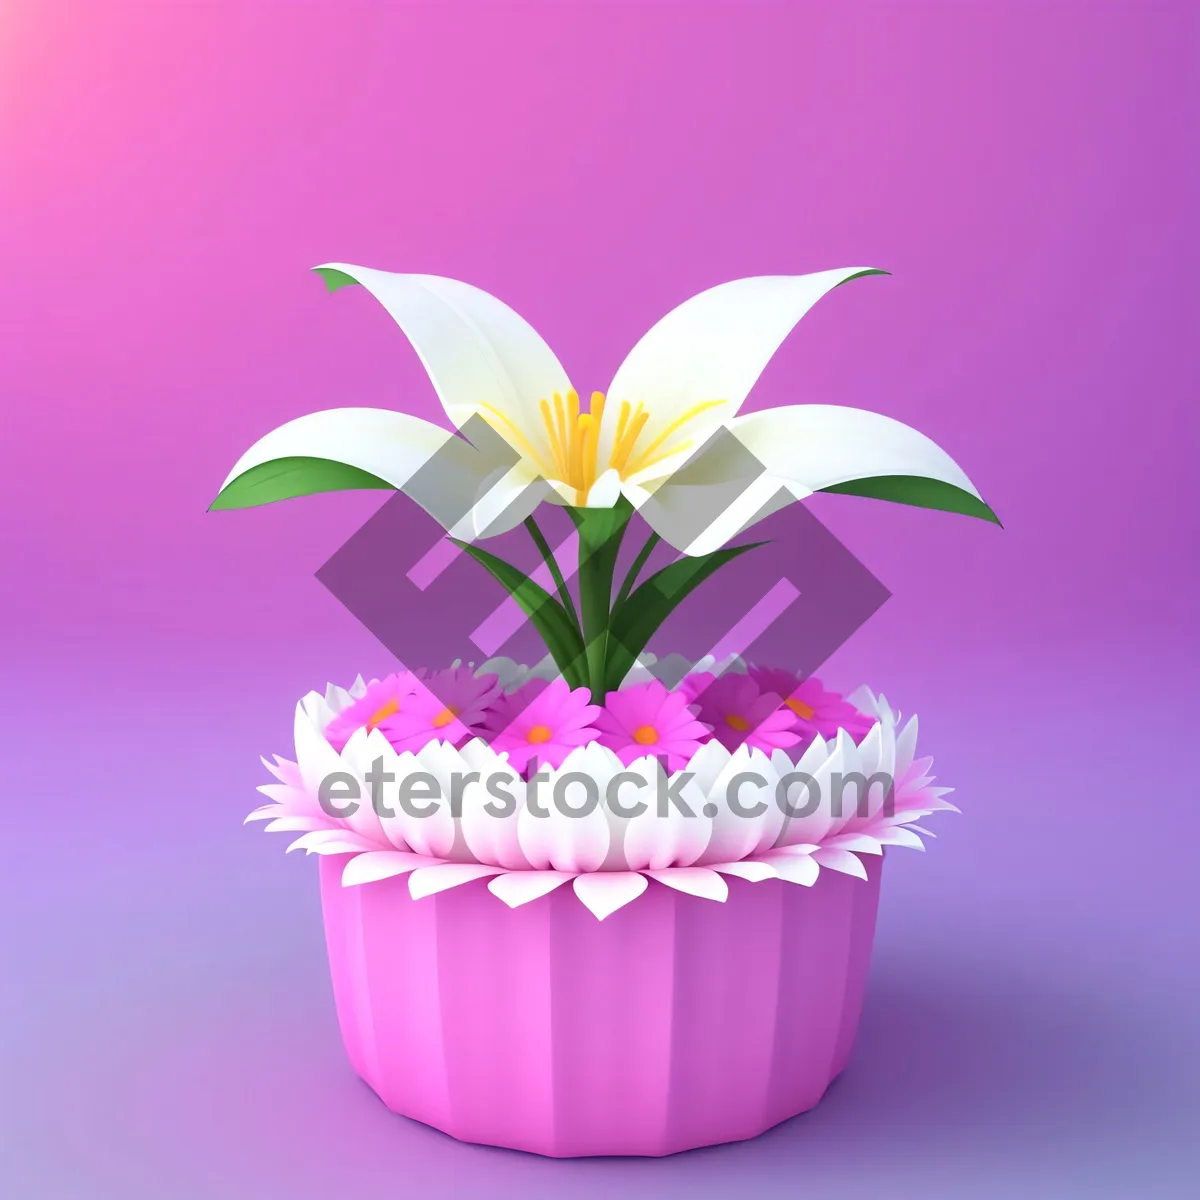 Picture of Spring Floral Lily with Vibrant Pink Petals